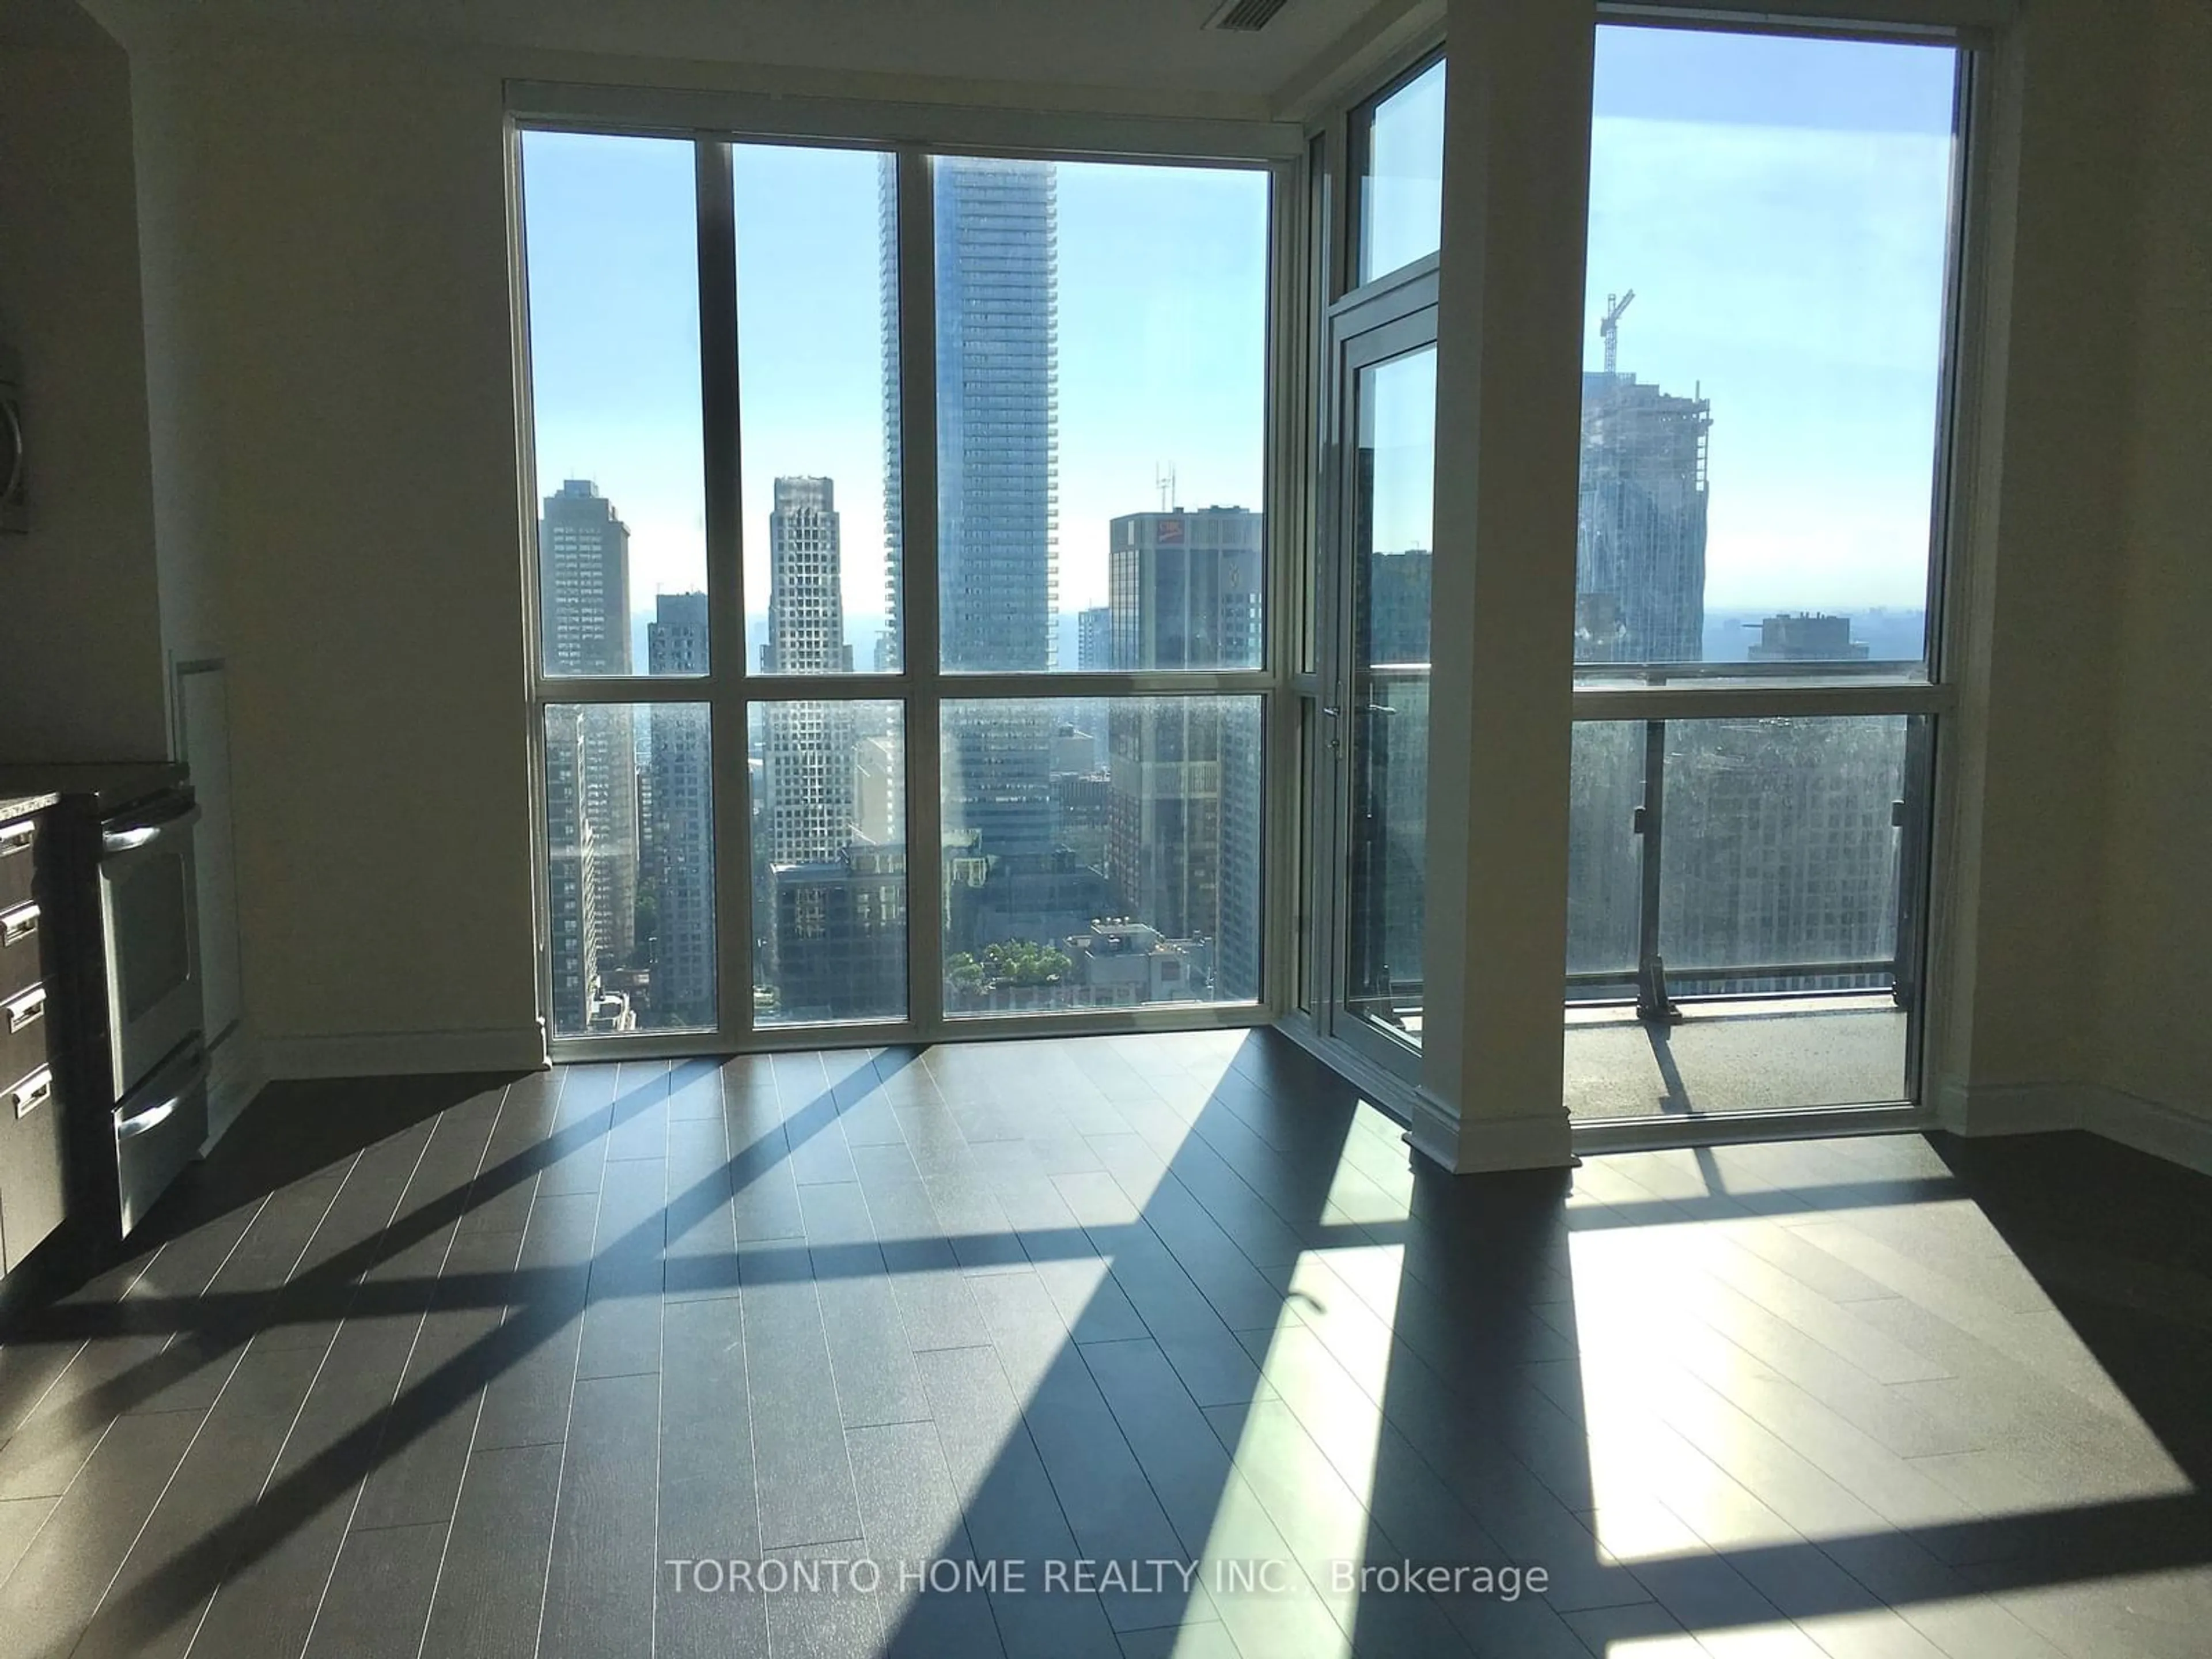 Other indoor space for 28 Ted Rogers Way #PH07, Toronto Ontario M4Y 2J4